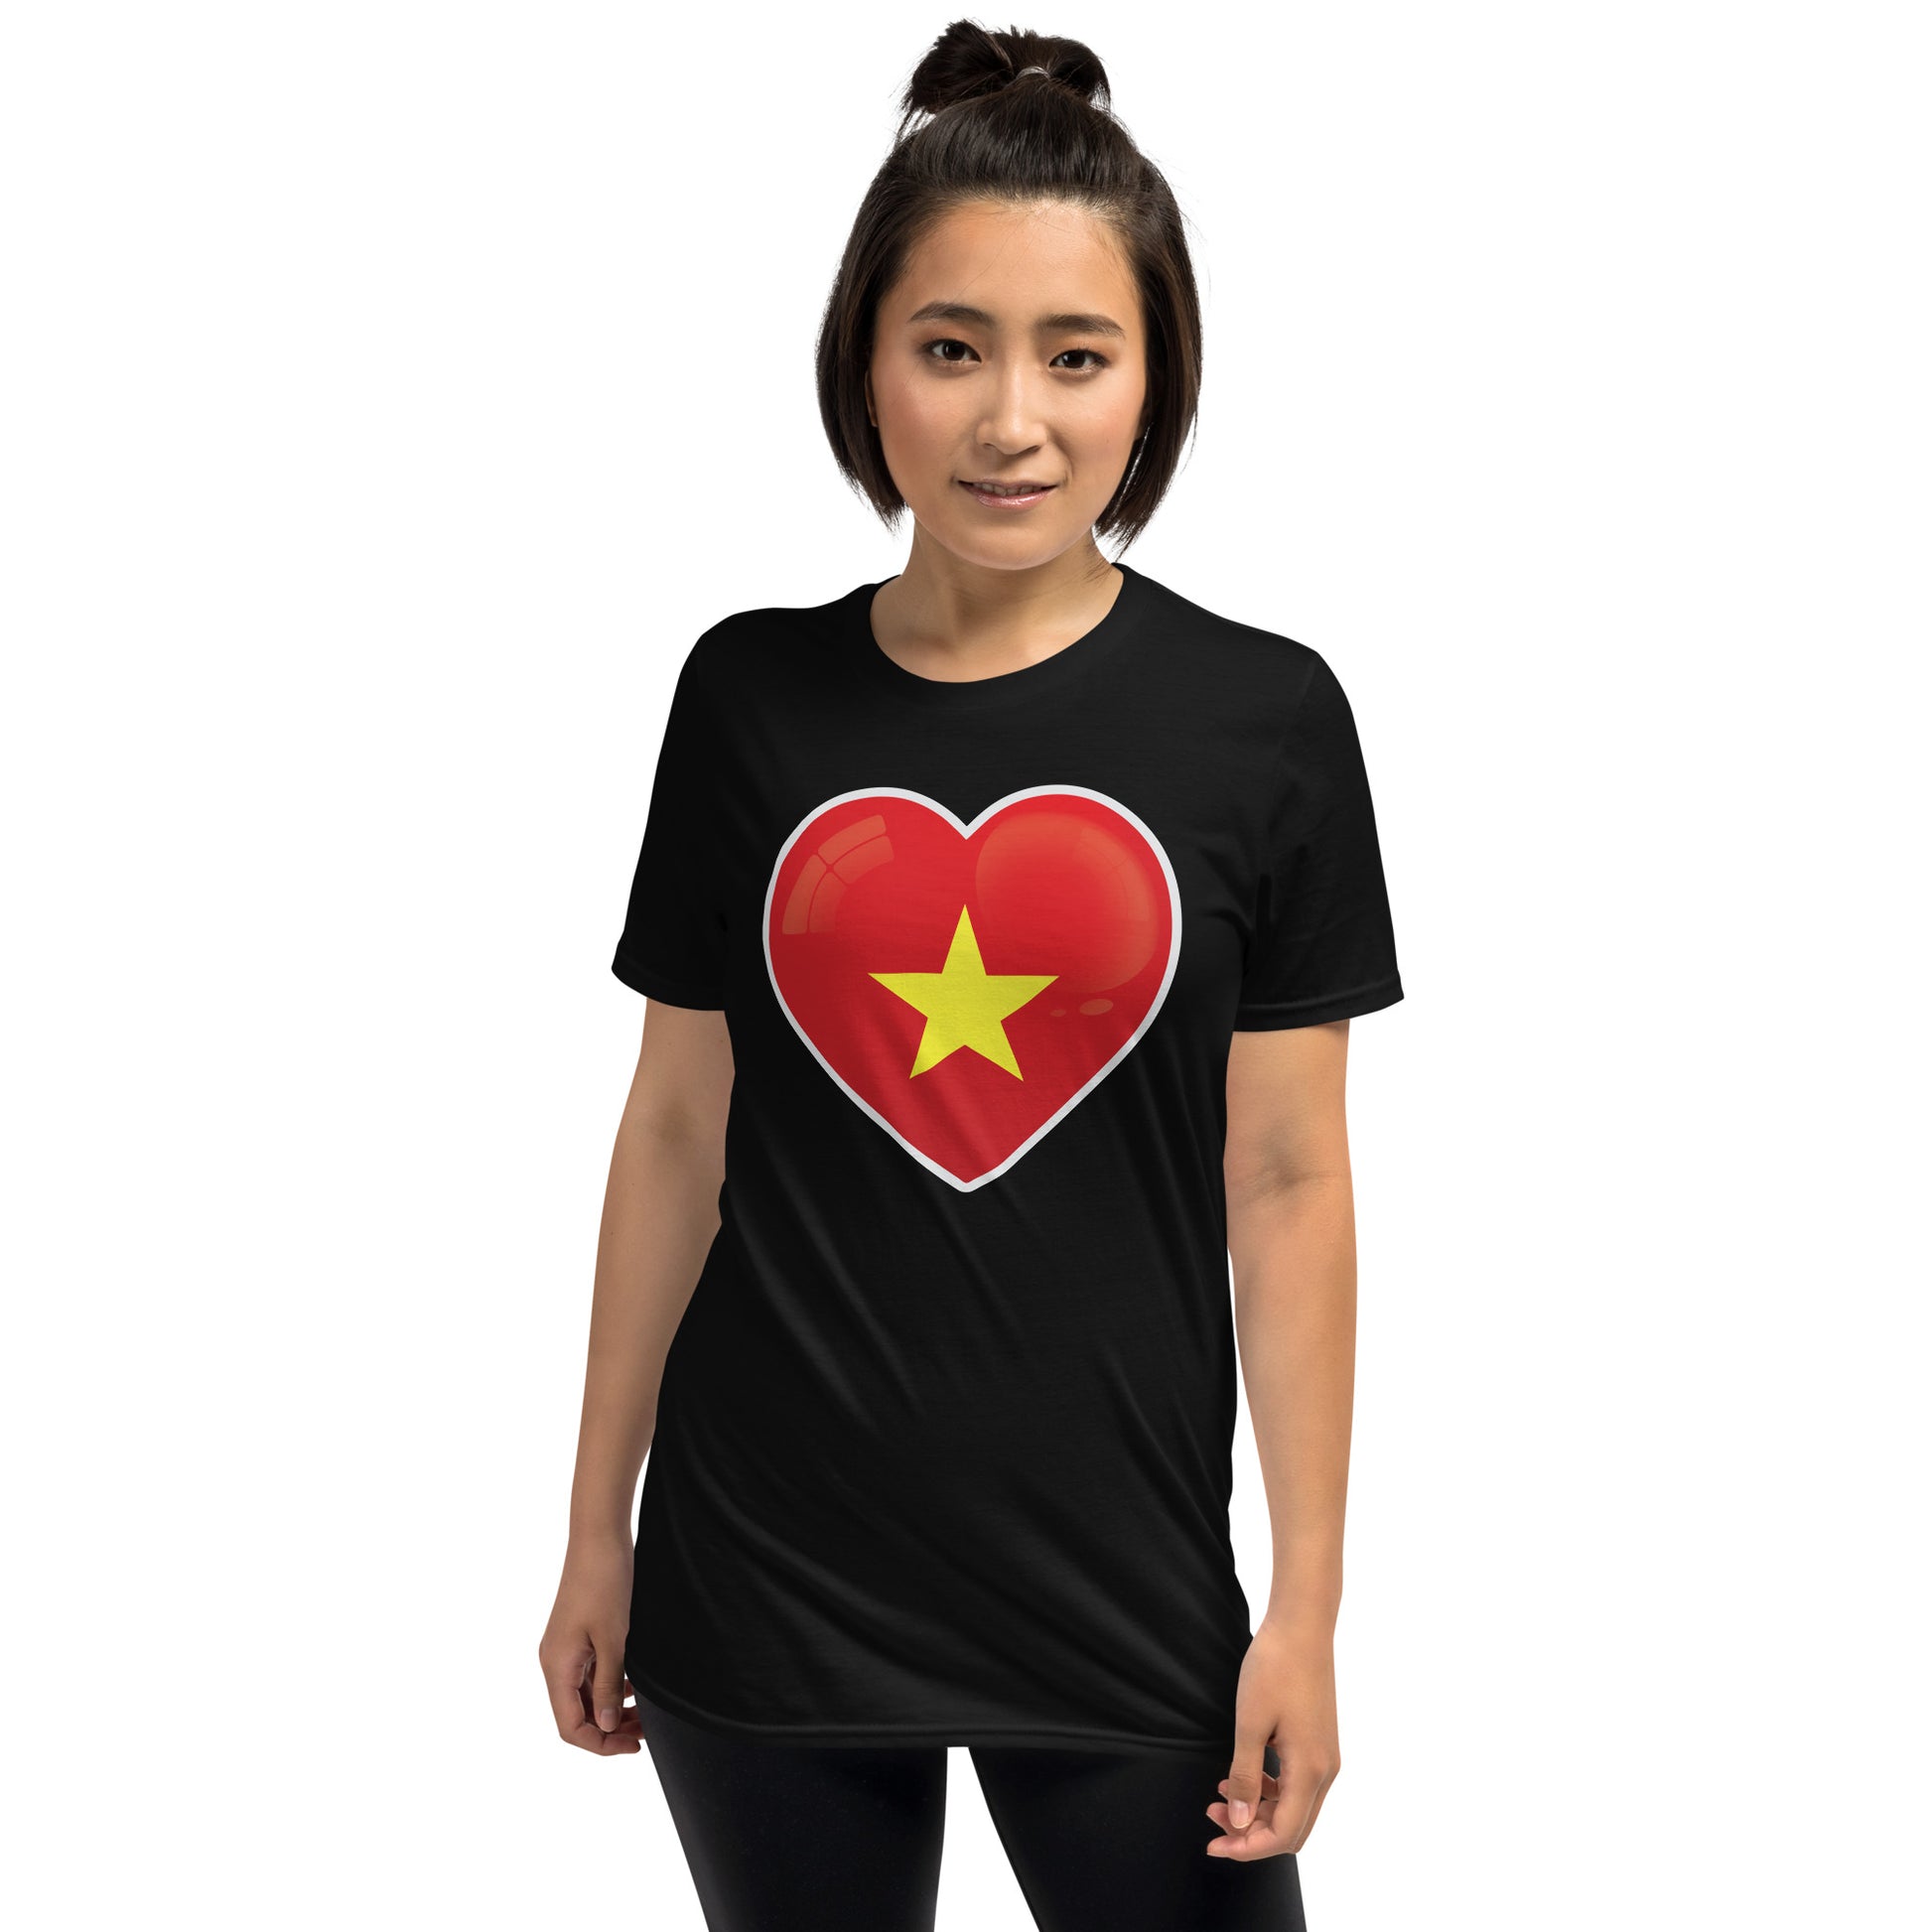 Authentic Vietnamese T-Shirt with red heart design